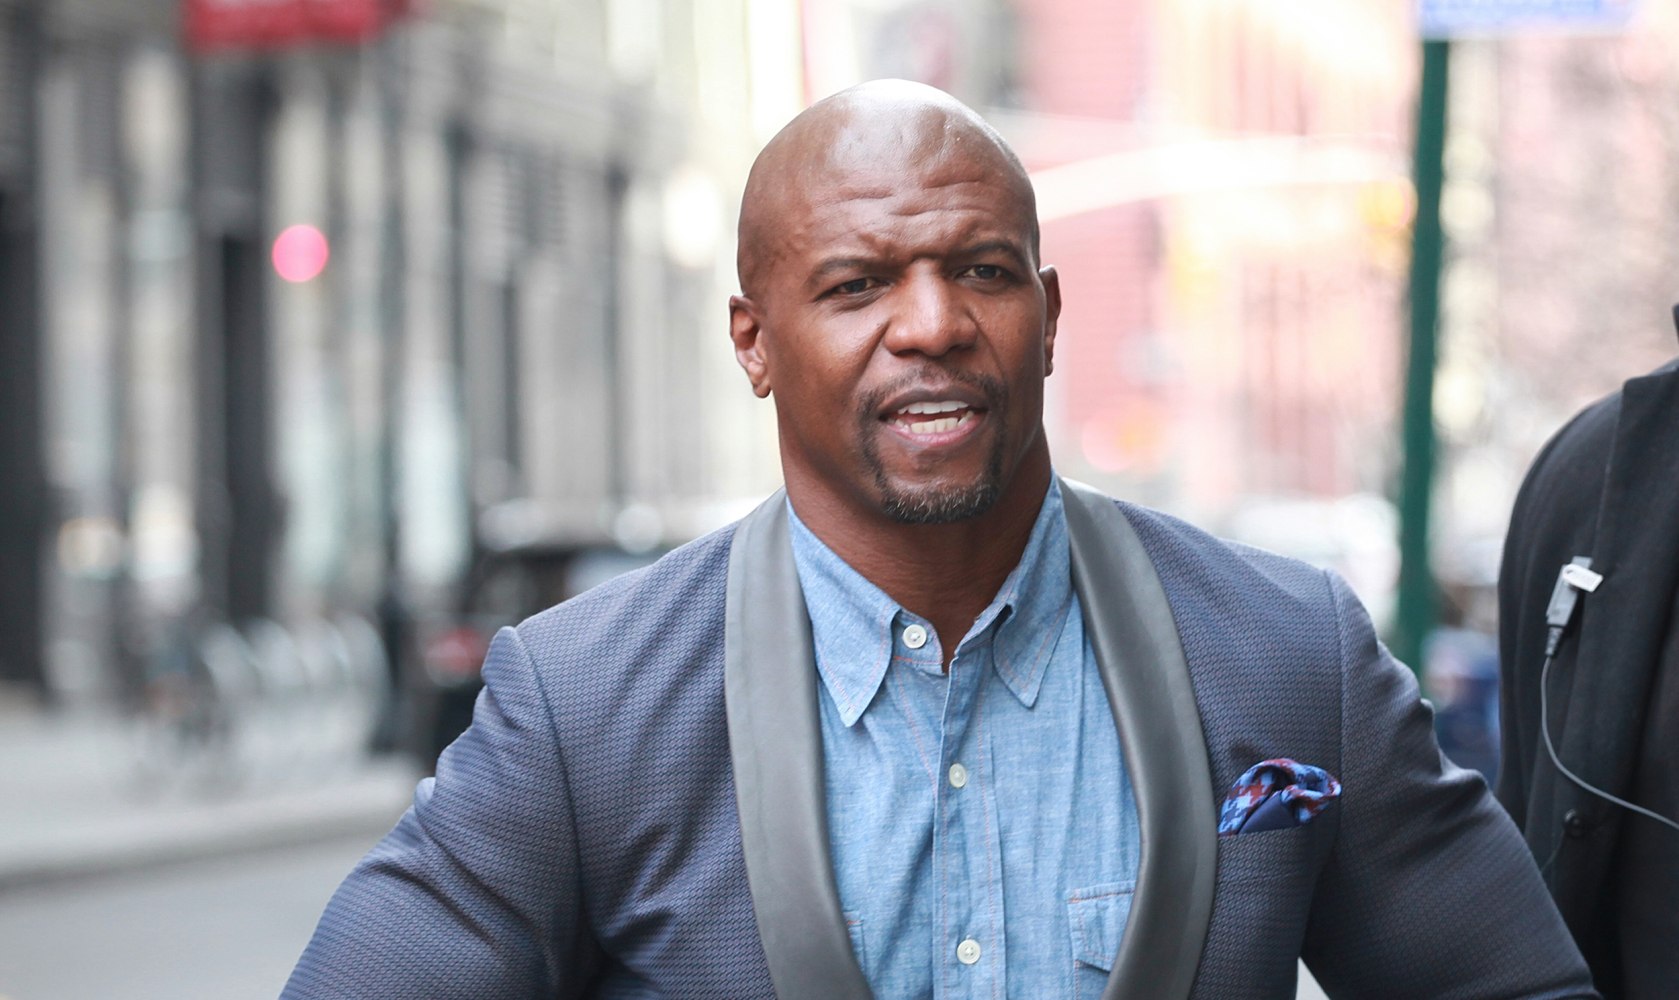 No charges for agent accused of groping Terry Crews - NBC News